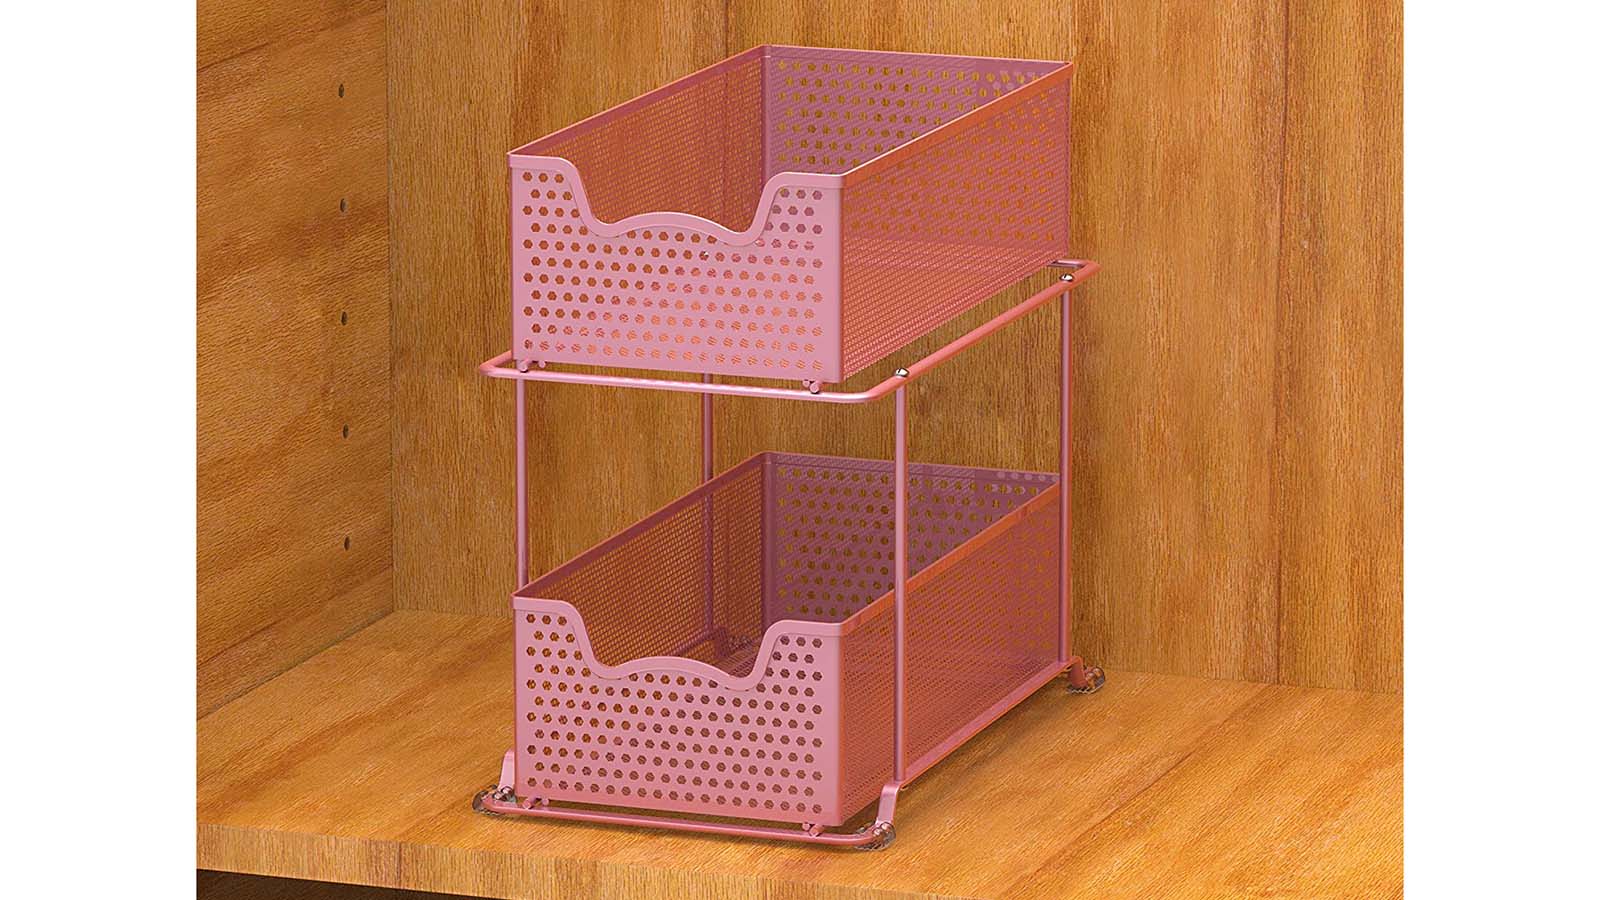 34 super-cute pink organizers for your home in 2023